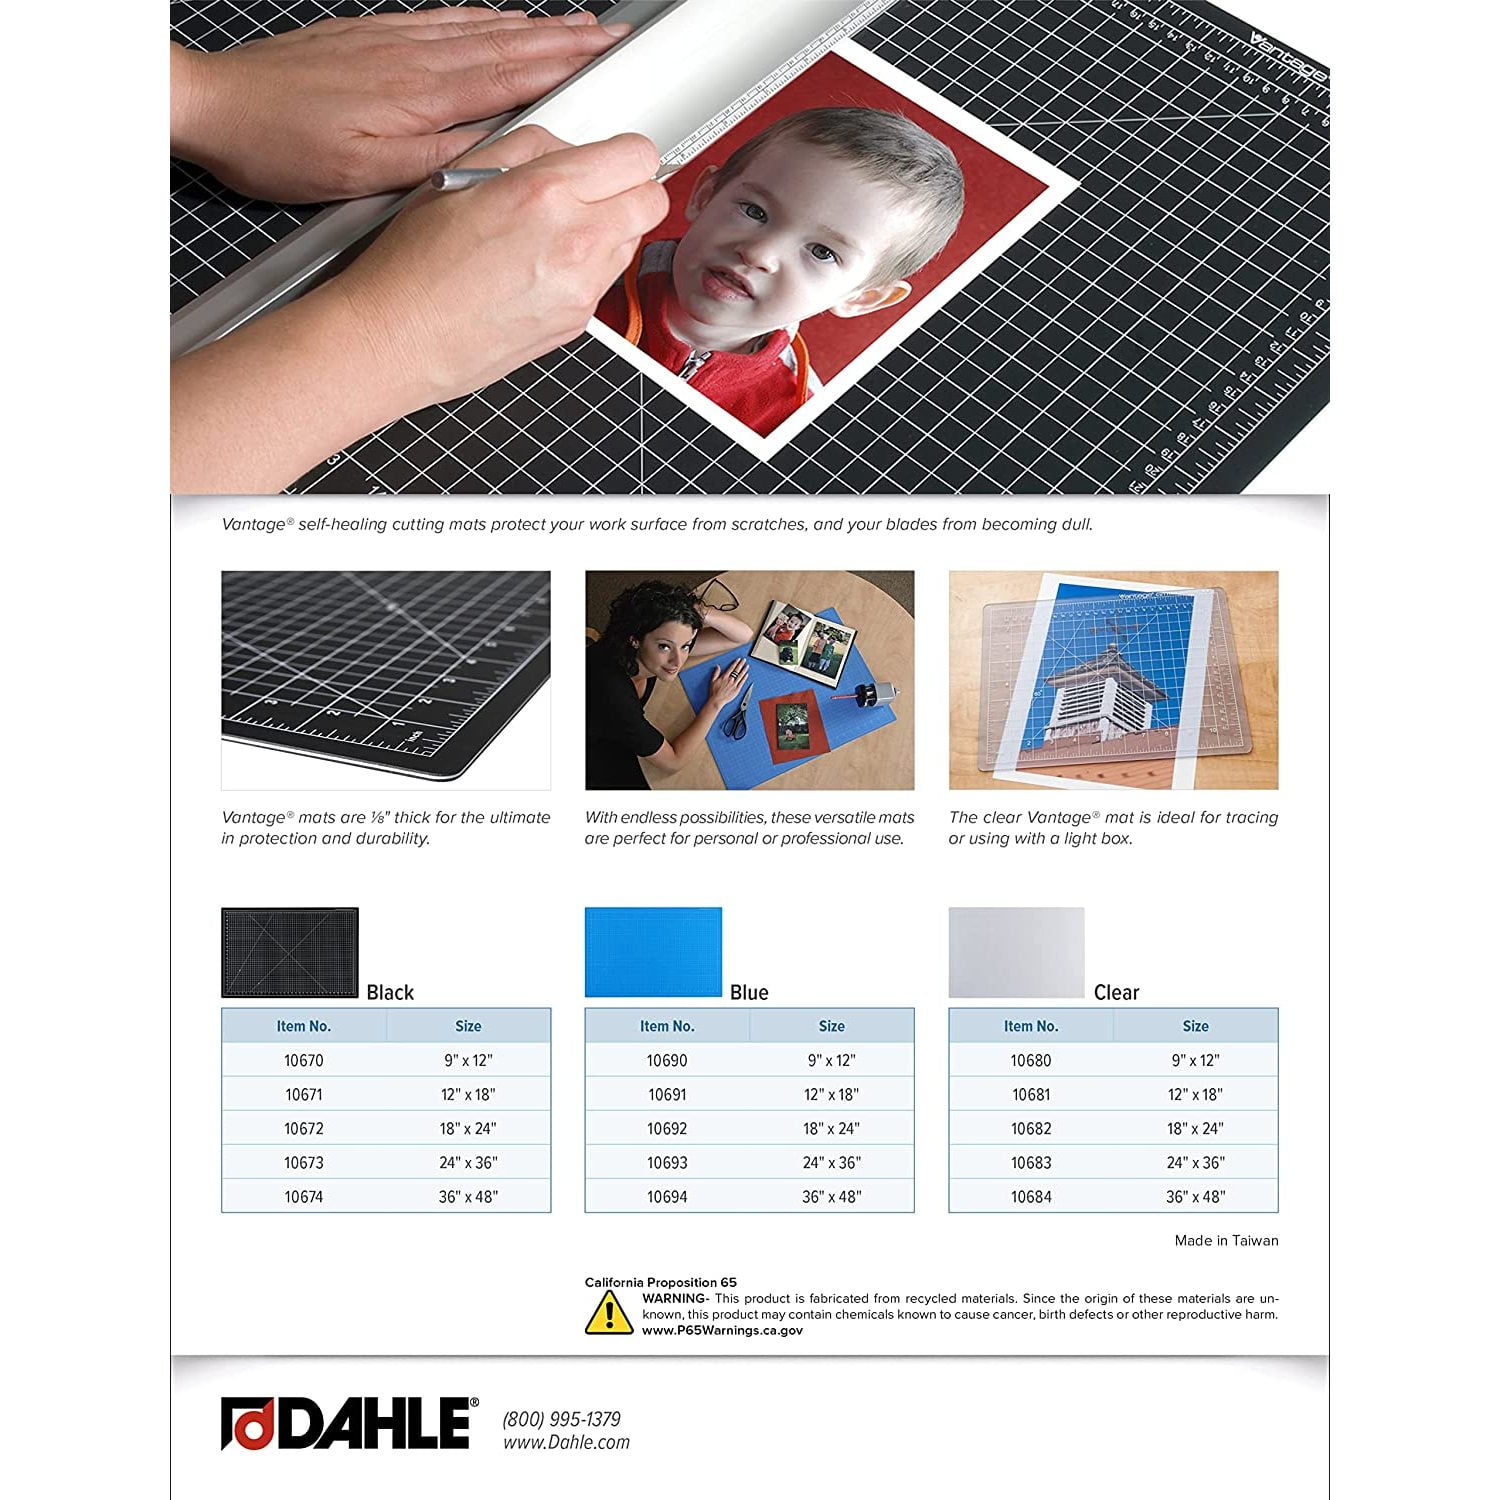 Vantage 10673 Self-Healing Cutting Mat, 24x36, 1/2 Grid, Layers for Max  Healing, Perfect for Crafts  Sewing, Black, [SELF-HEALING] -- 5-layer  de...